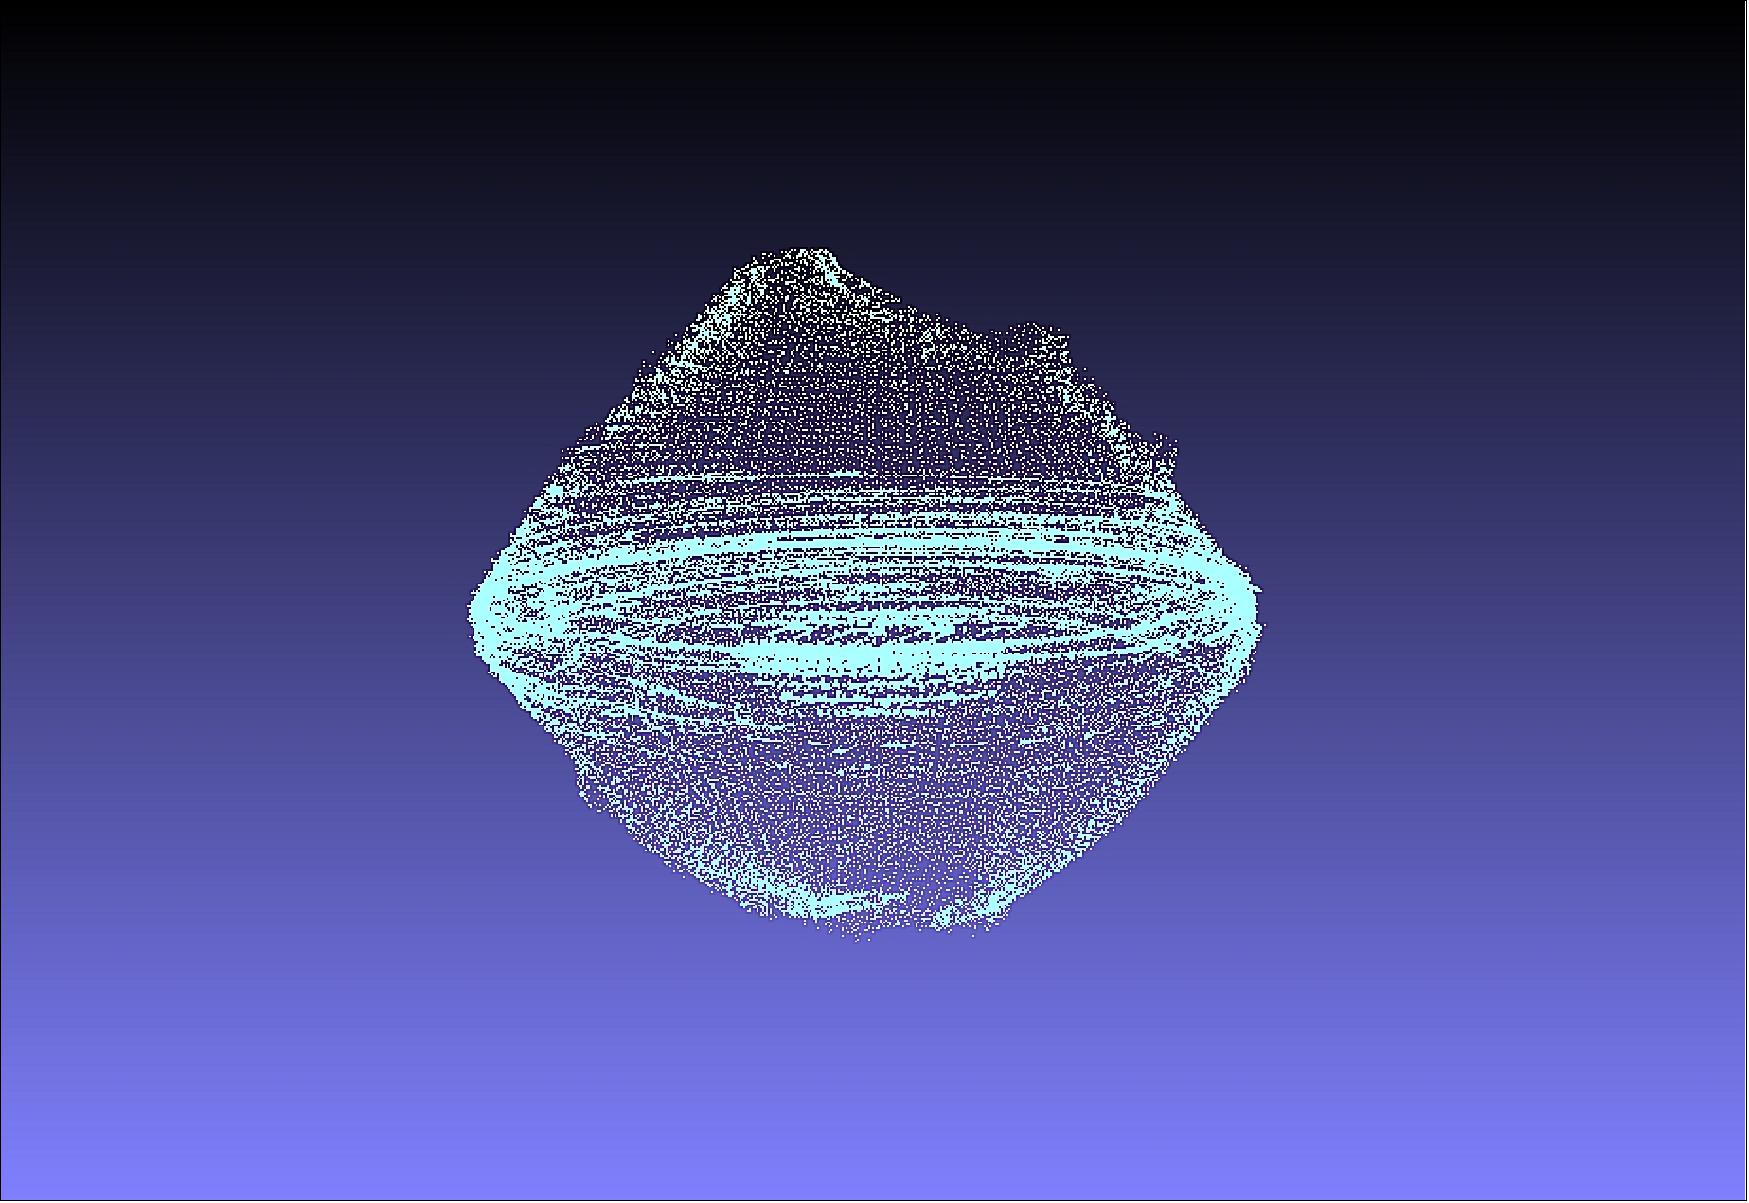 Figure 79: To create the figure from the LIDAR data, the project used the shape model of Ryugu to guide the three-dimensional structure (image credit: National Astronomical Observatory of Japan (NAOJ), JAXA, Chiba Institute of Technology, University of Aizu, Nihon University, Osaka University)